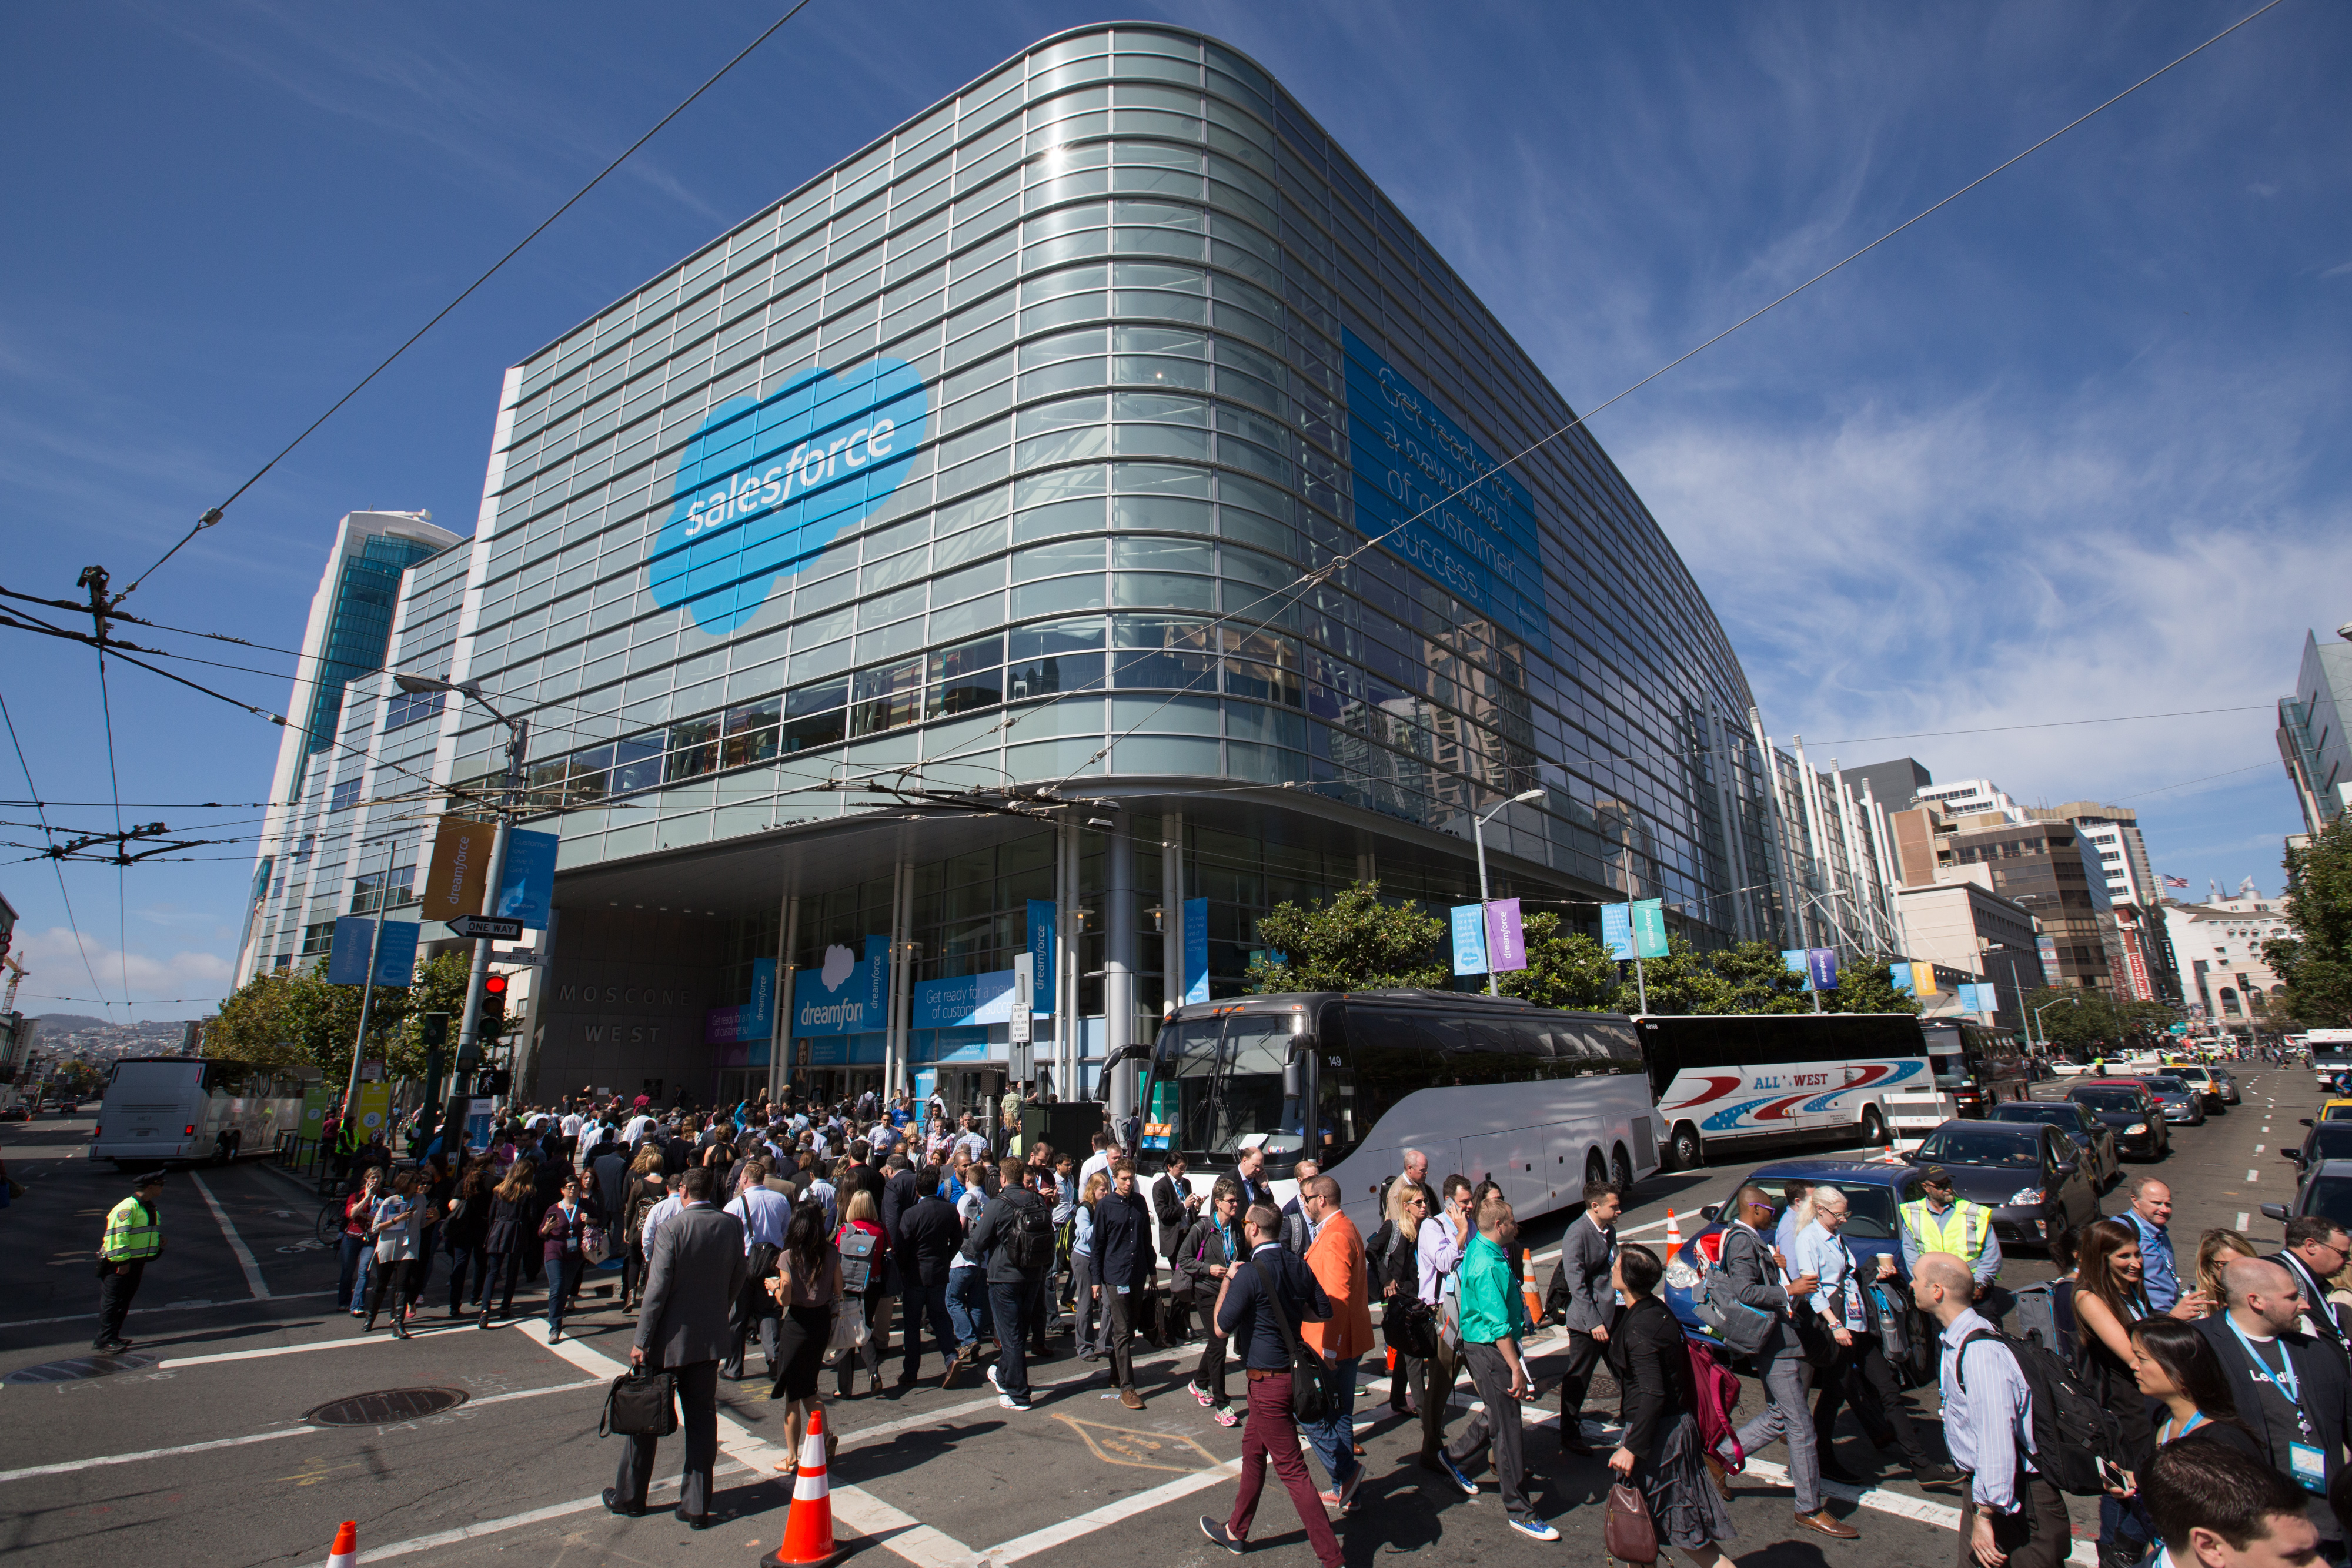 Friday Agenda: Don't Miss These 7 Things Today at Dreamforce